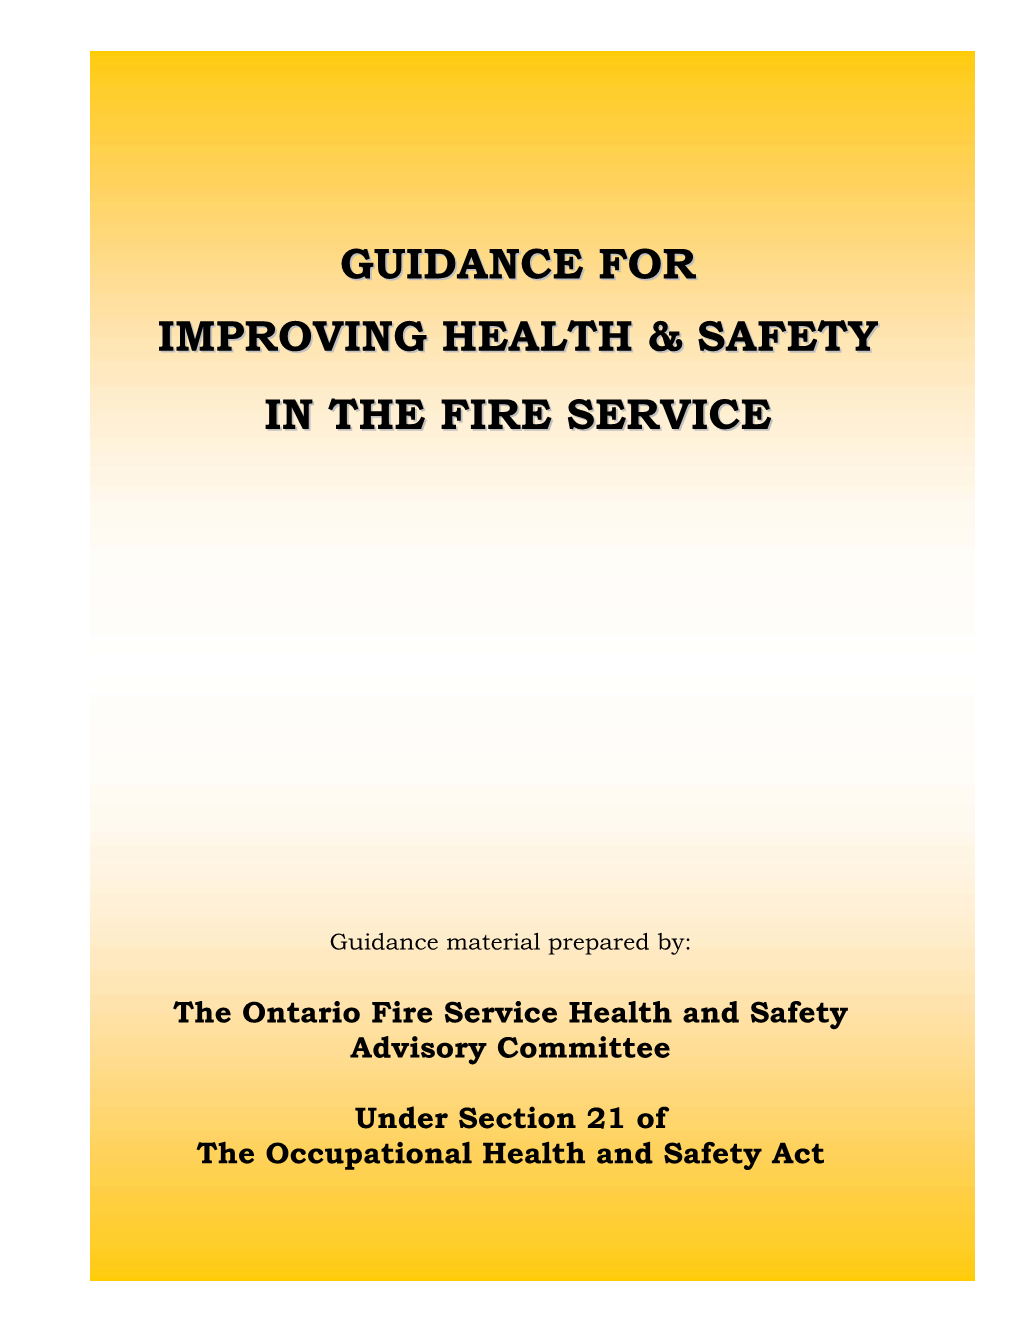 Guidance for Improving Health & Safety in the Fire